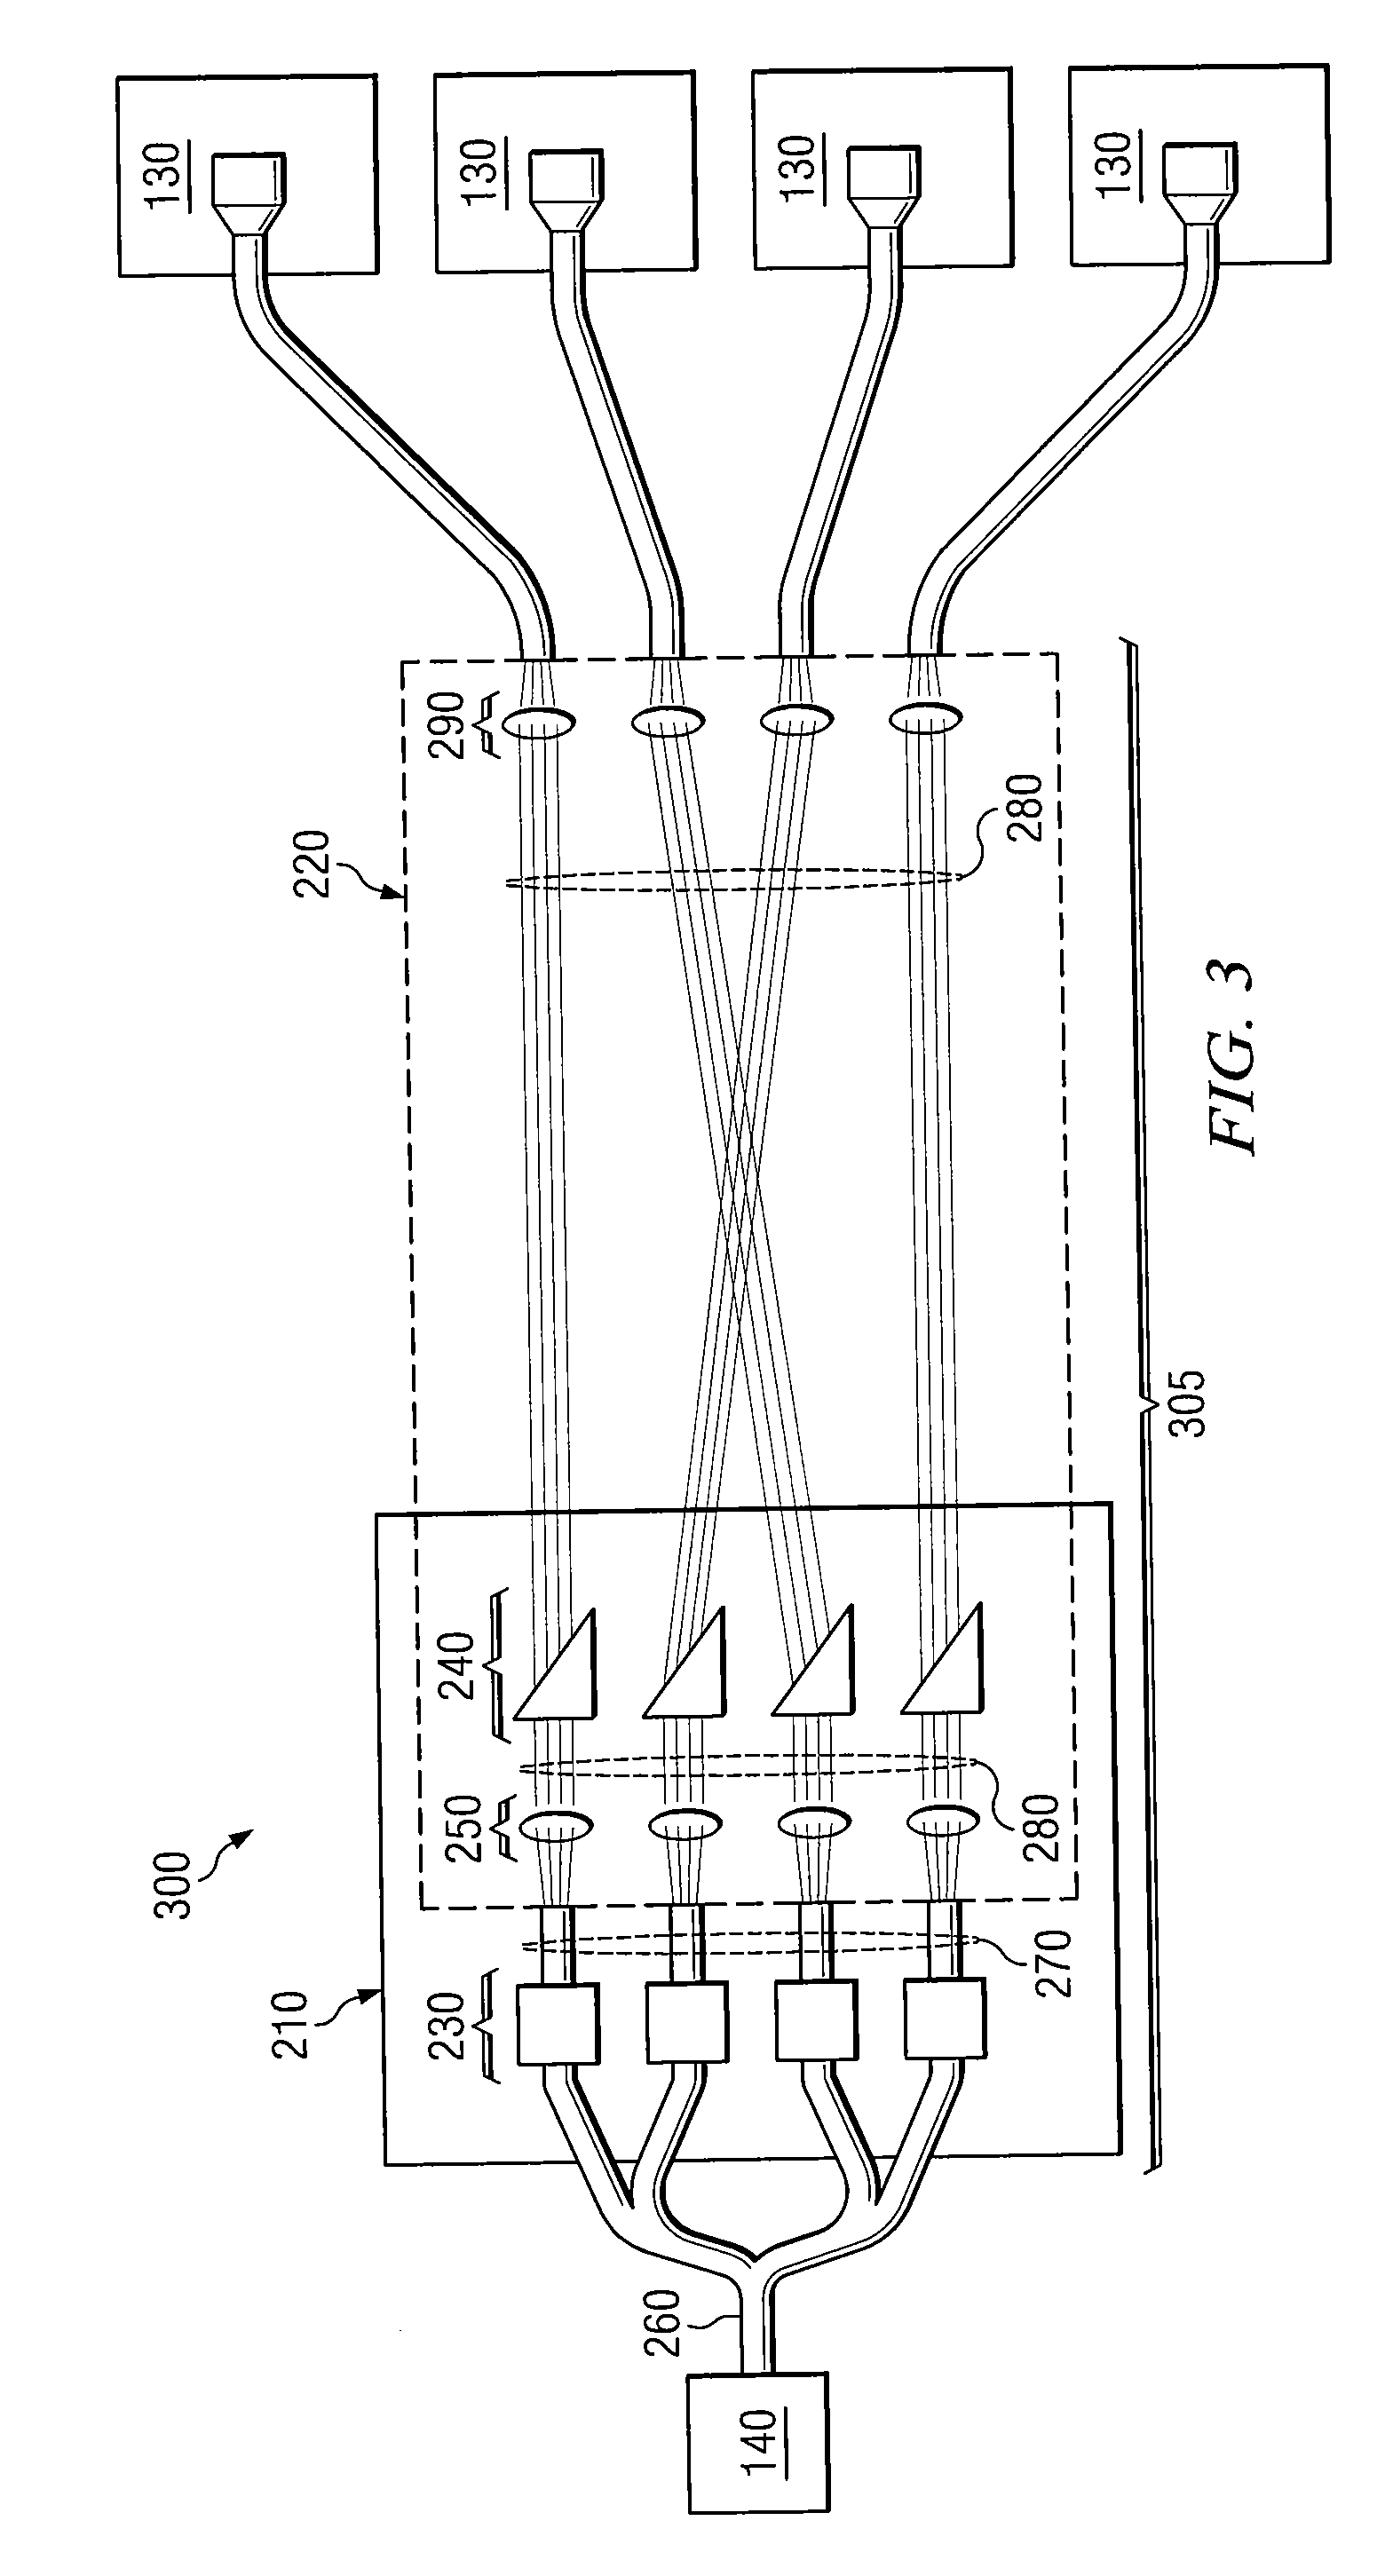 Dynamic Reconfigurable Optical Interconnect System